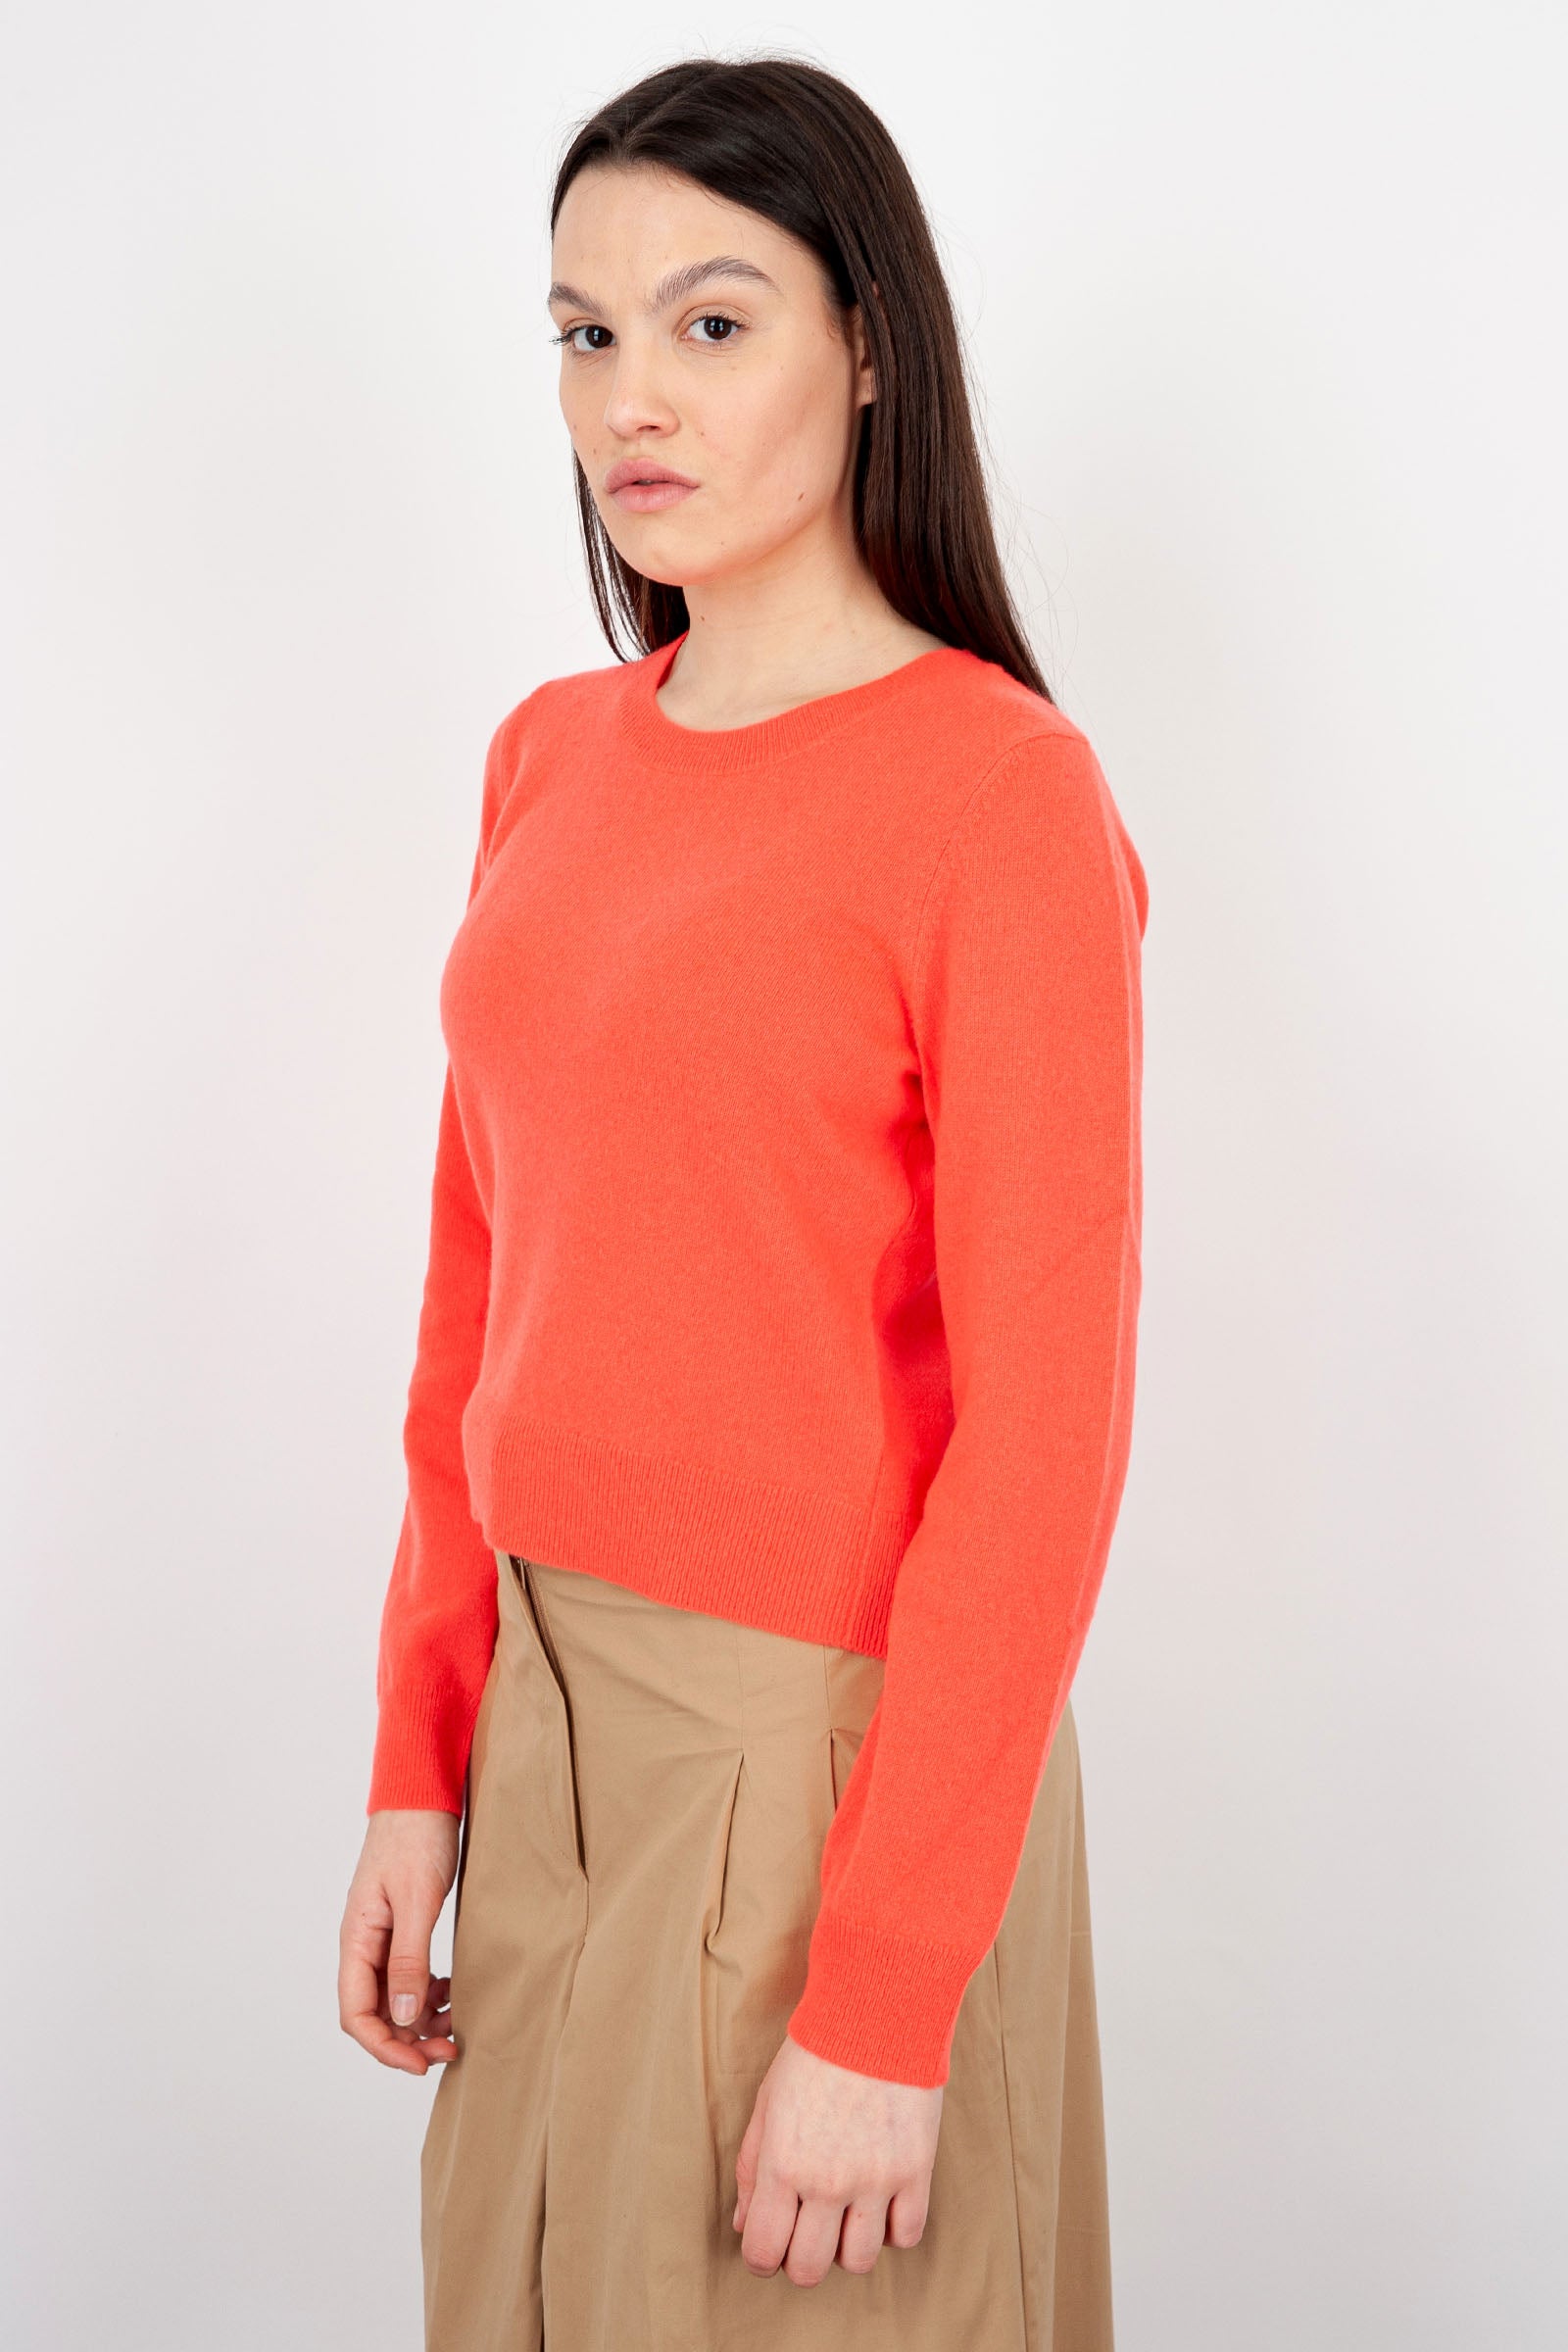 Absolut Cashmere Carlie Crewneck Sweater in Coral Wool - 3